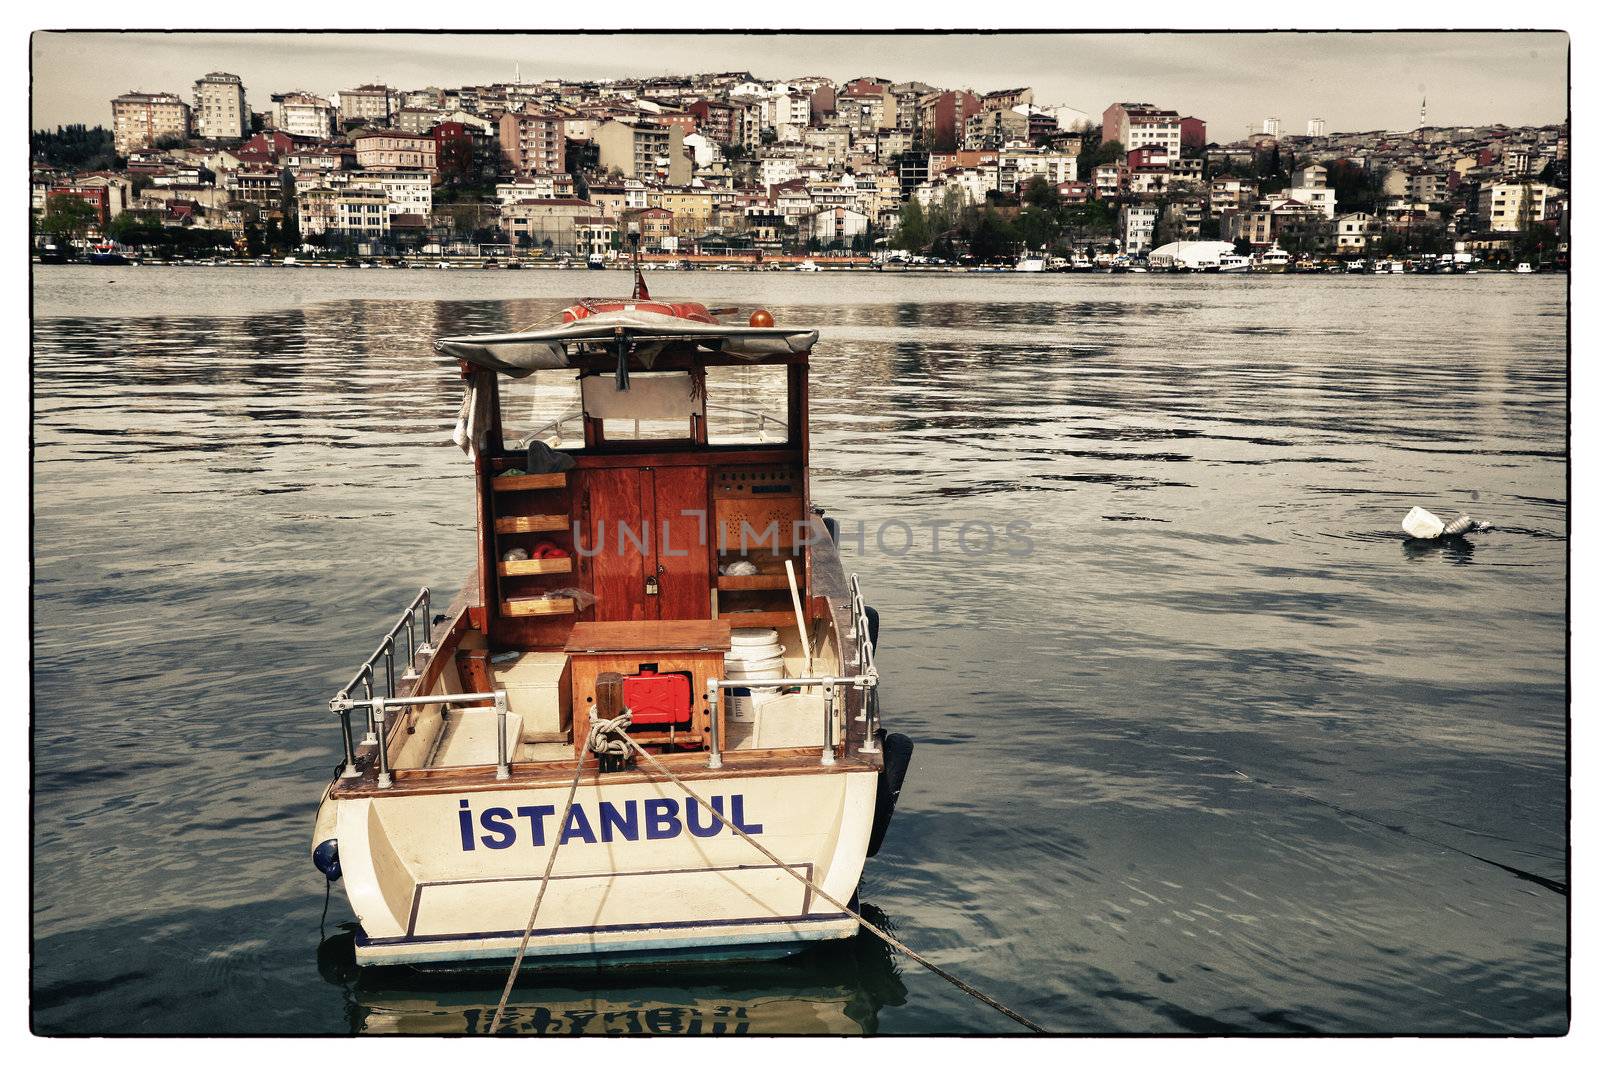 Postcard from Istanbul. Motor boat by the Golden Horn - Istanbul, Turkey. The Beyoglu district in the background.